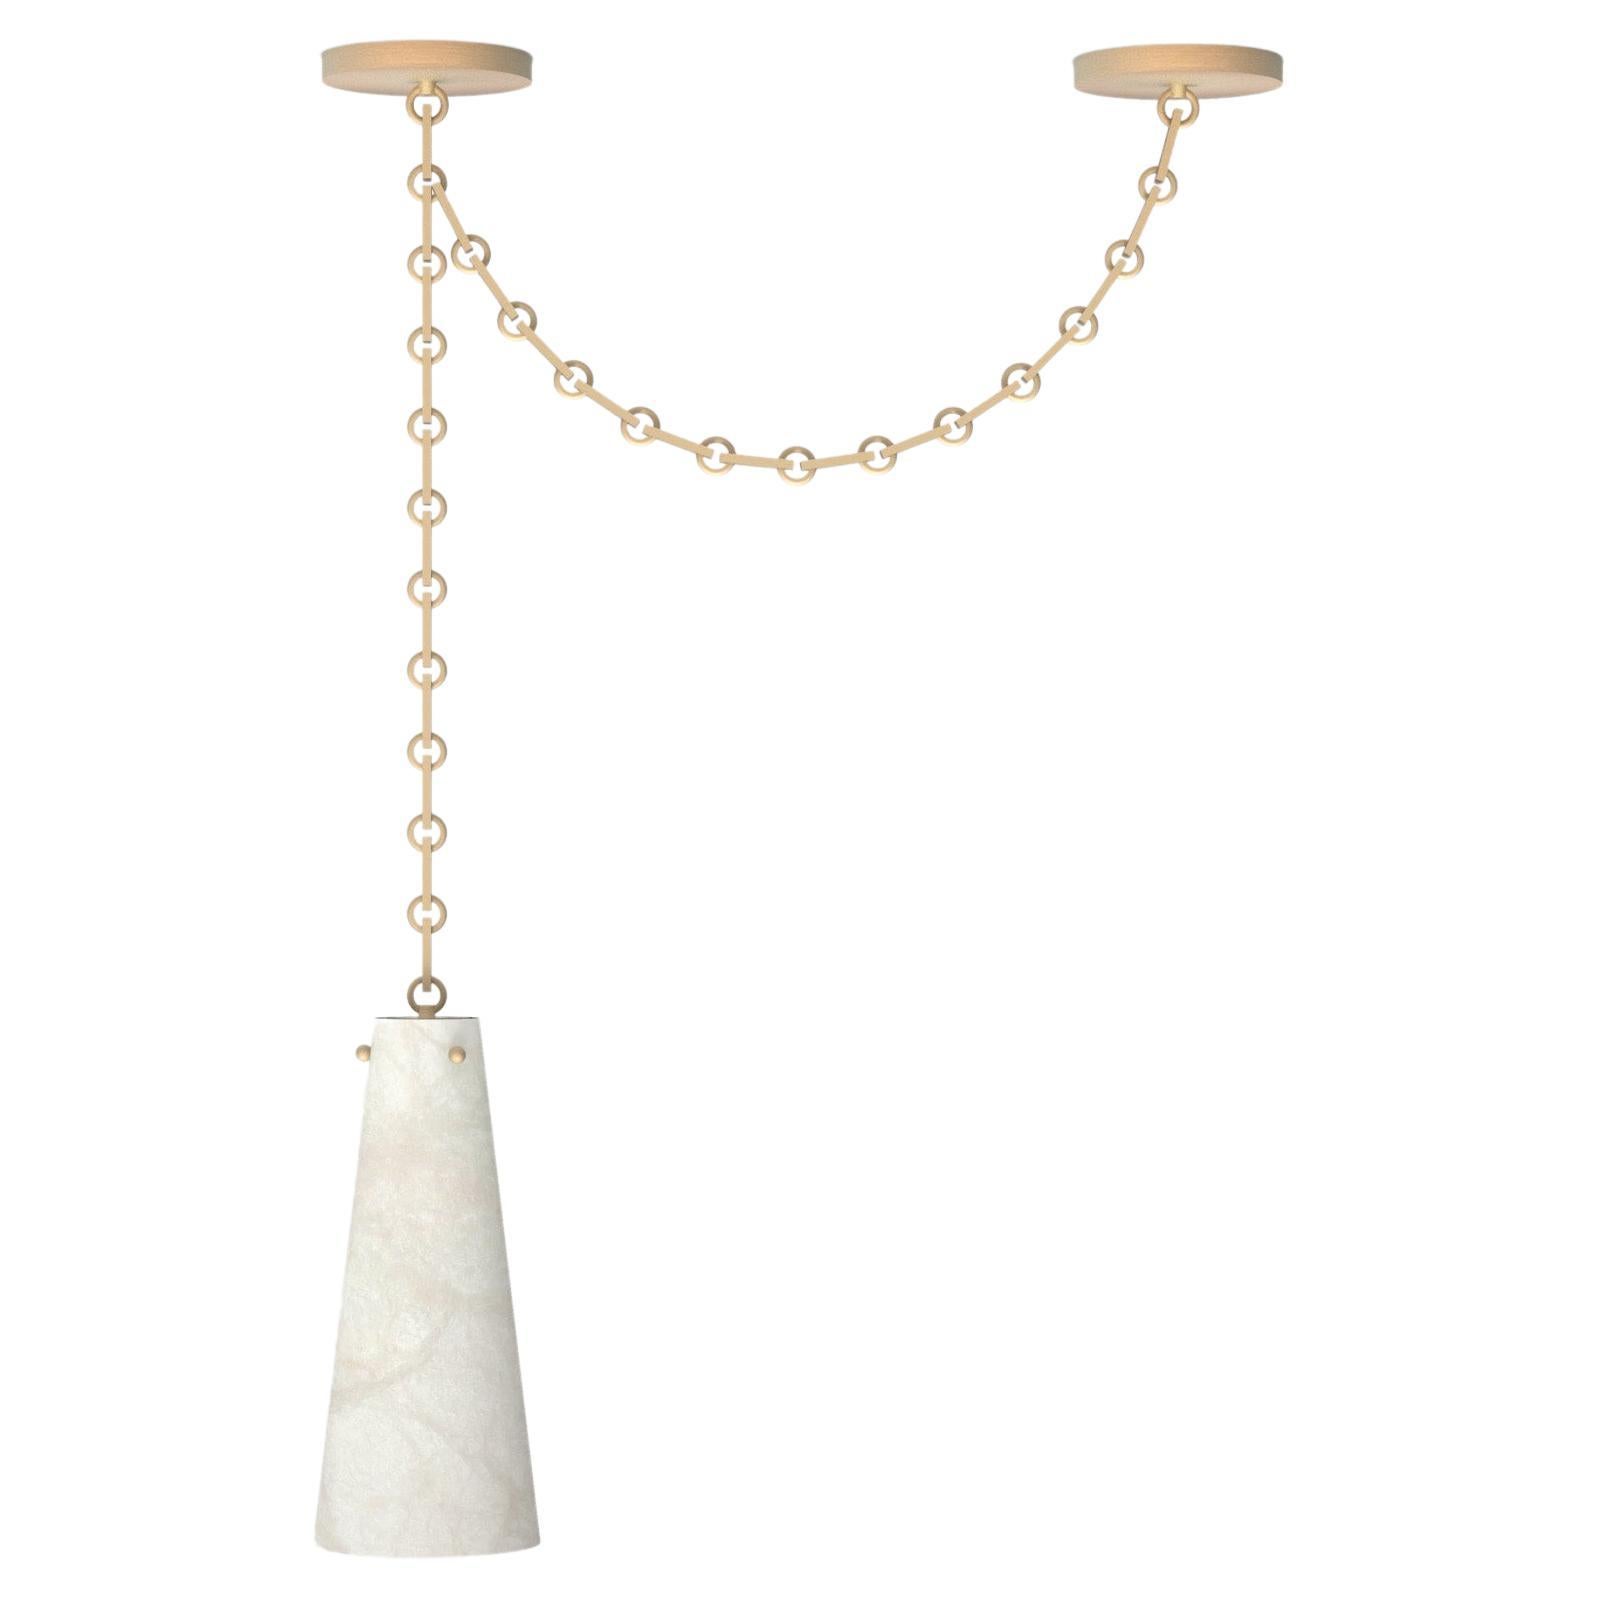 Contemporary Lucca Pendant 202A-1S in Alabaster by Orphan Work, 2021 For Sale